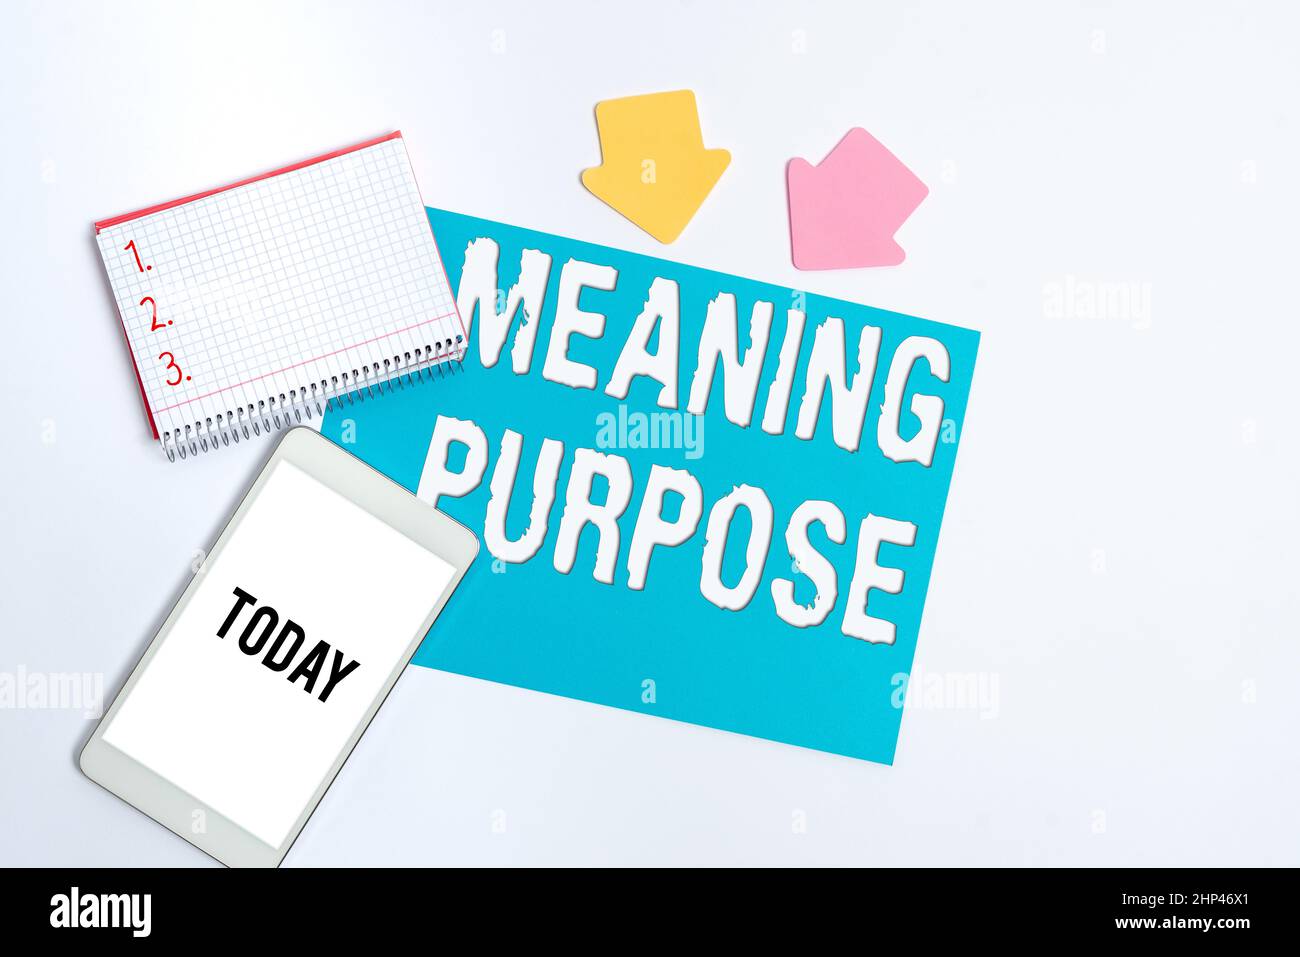 Handwriting text Meaning Purpose, Internet Concept The reason for which something is done or created and exists Display of Different Color Sticker Not Stock Photo